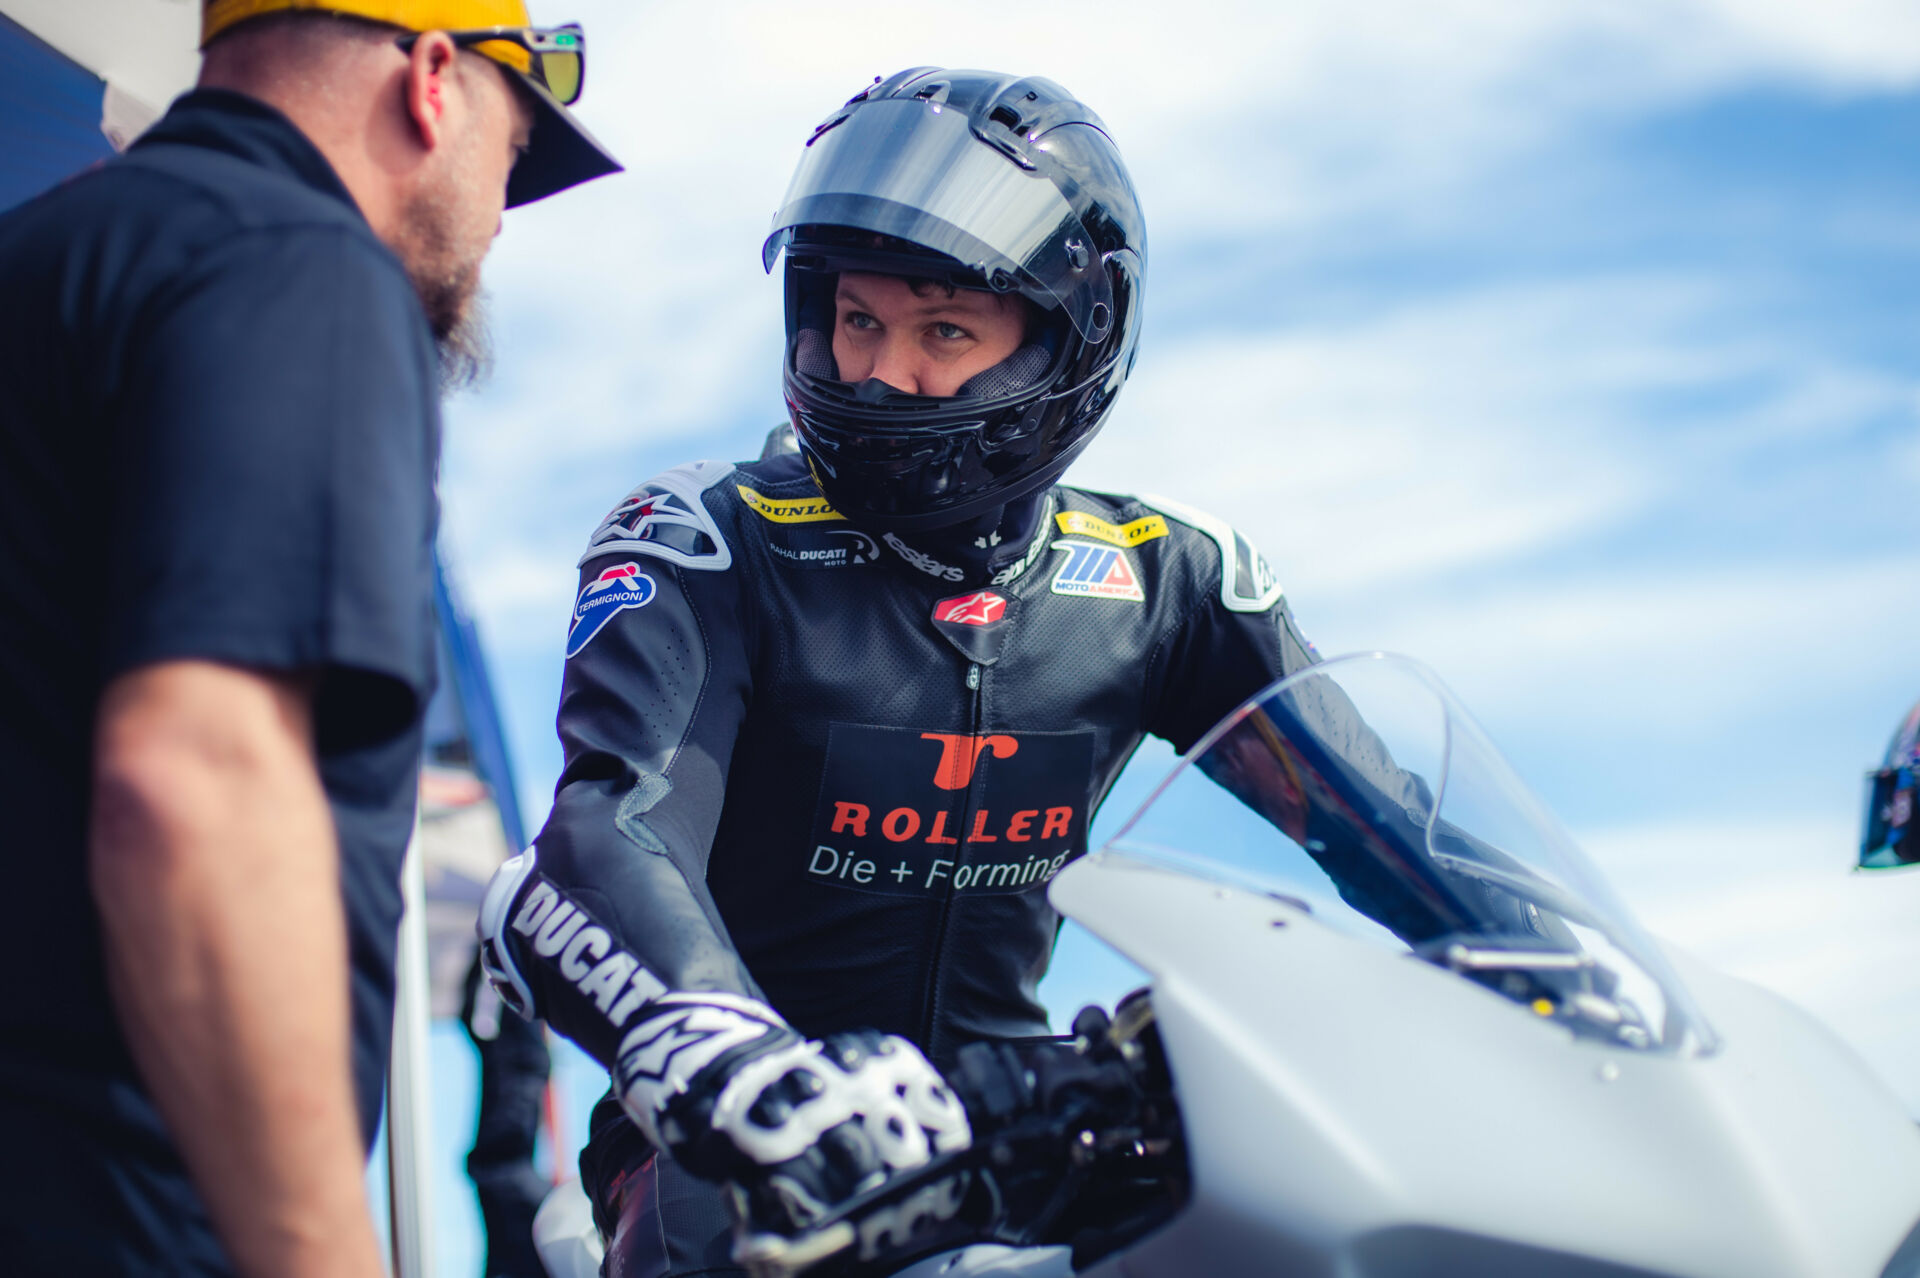 Corey Alexander talks with a crew member during the Rahal Ducati Moto test at Jennings GP, in Florida. Photo courtesy Rahal Ducati Moto.